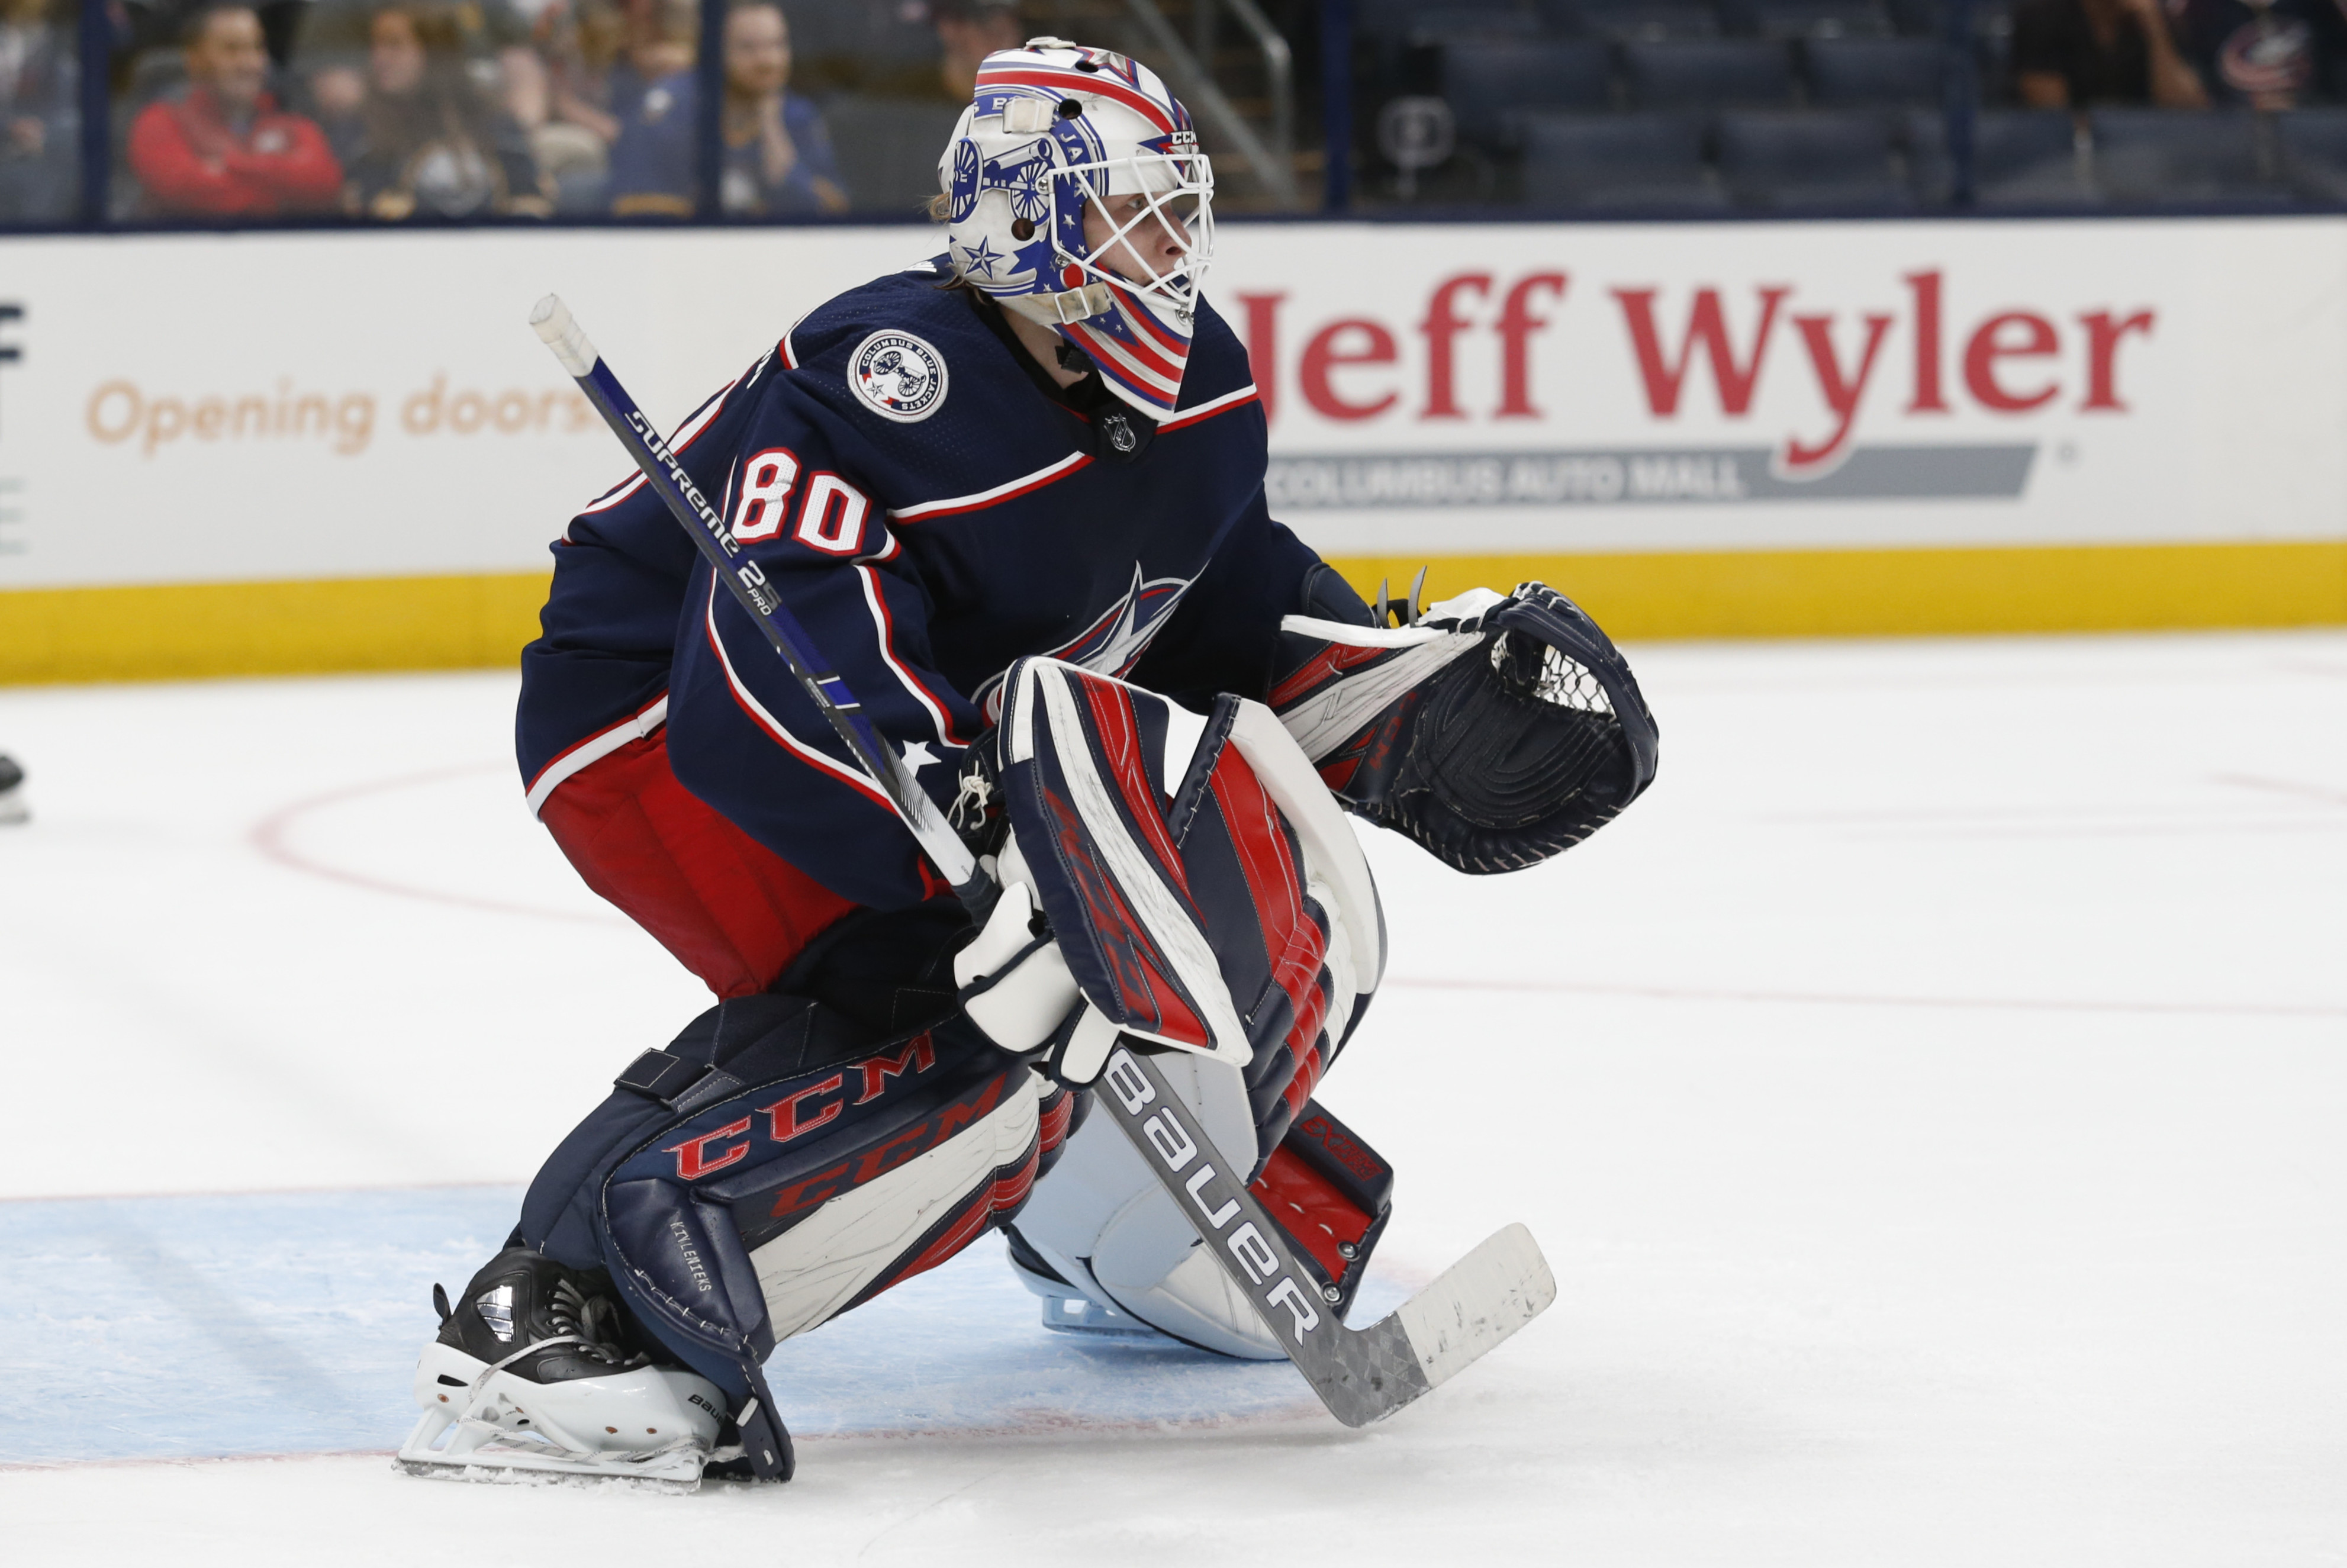 Columbus Blue Jackets player dies from chest trauma after